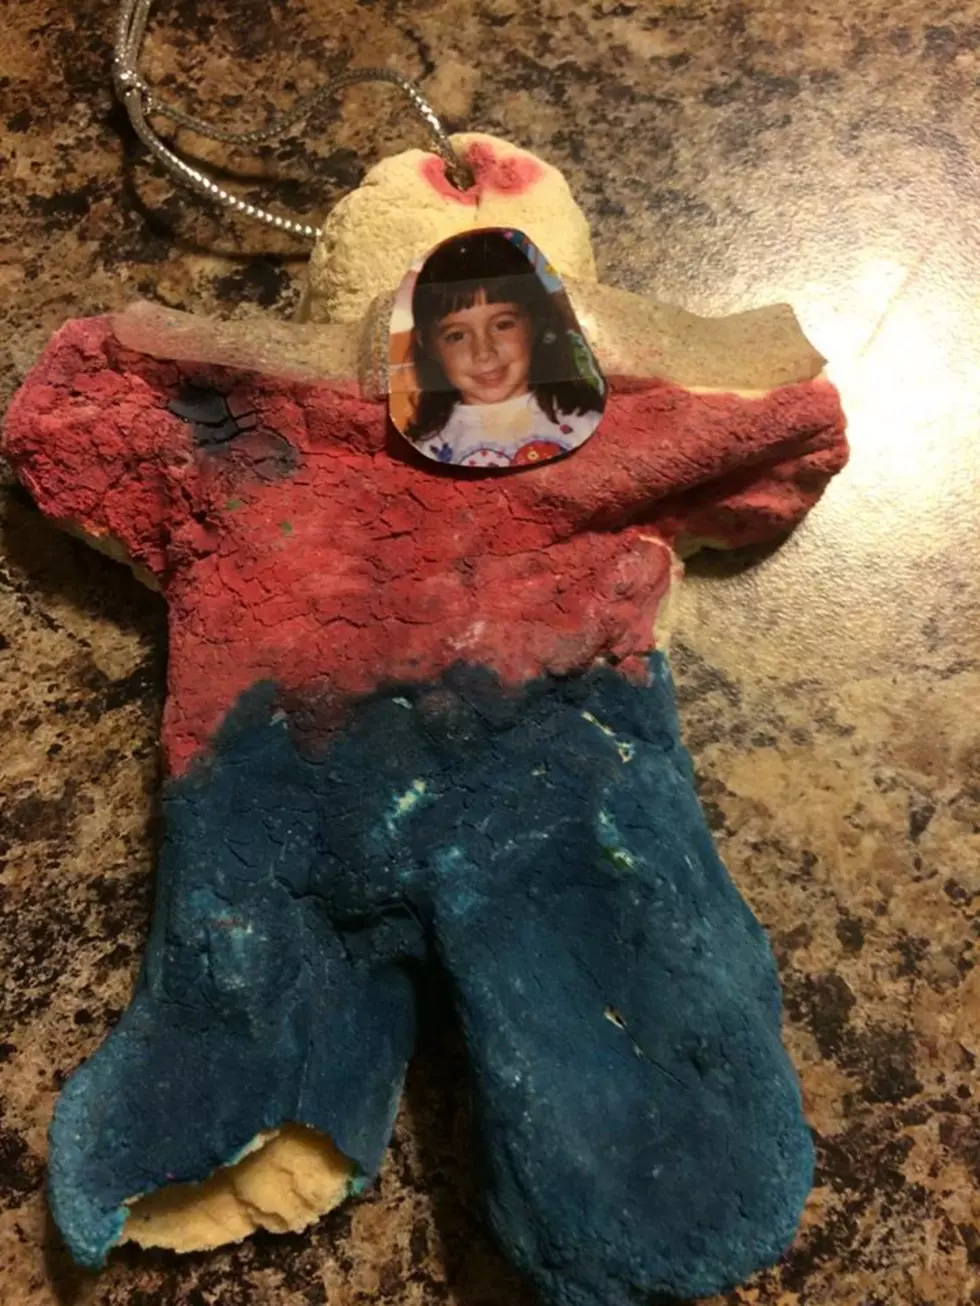 Back of the Tree Ornaments [PICTURE]